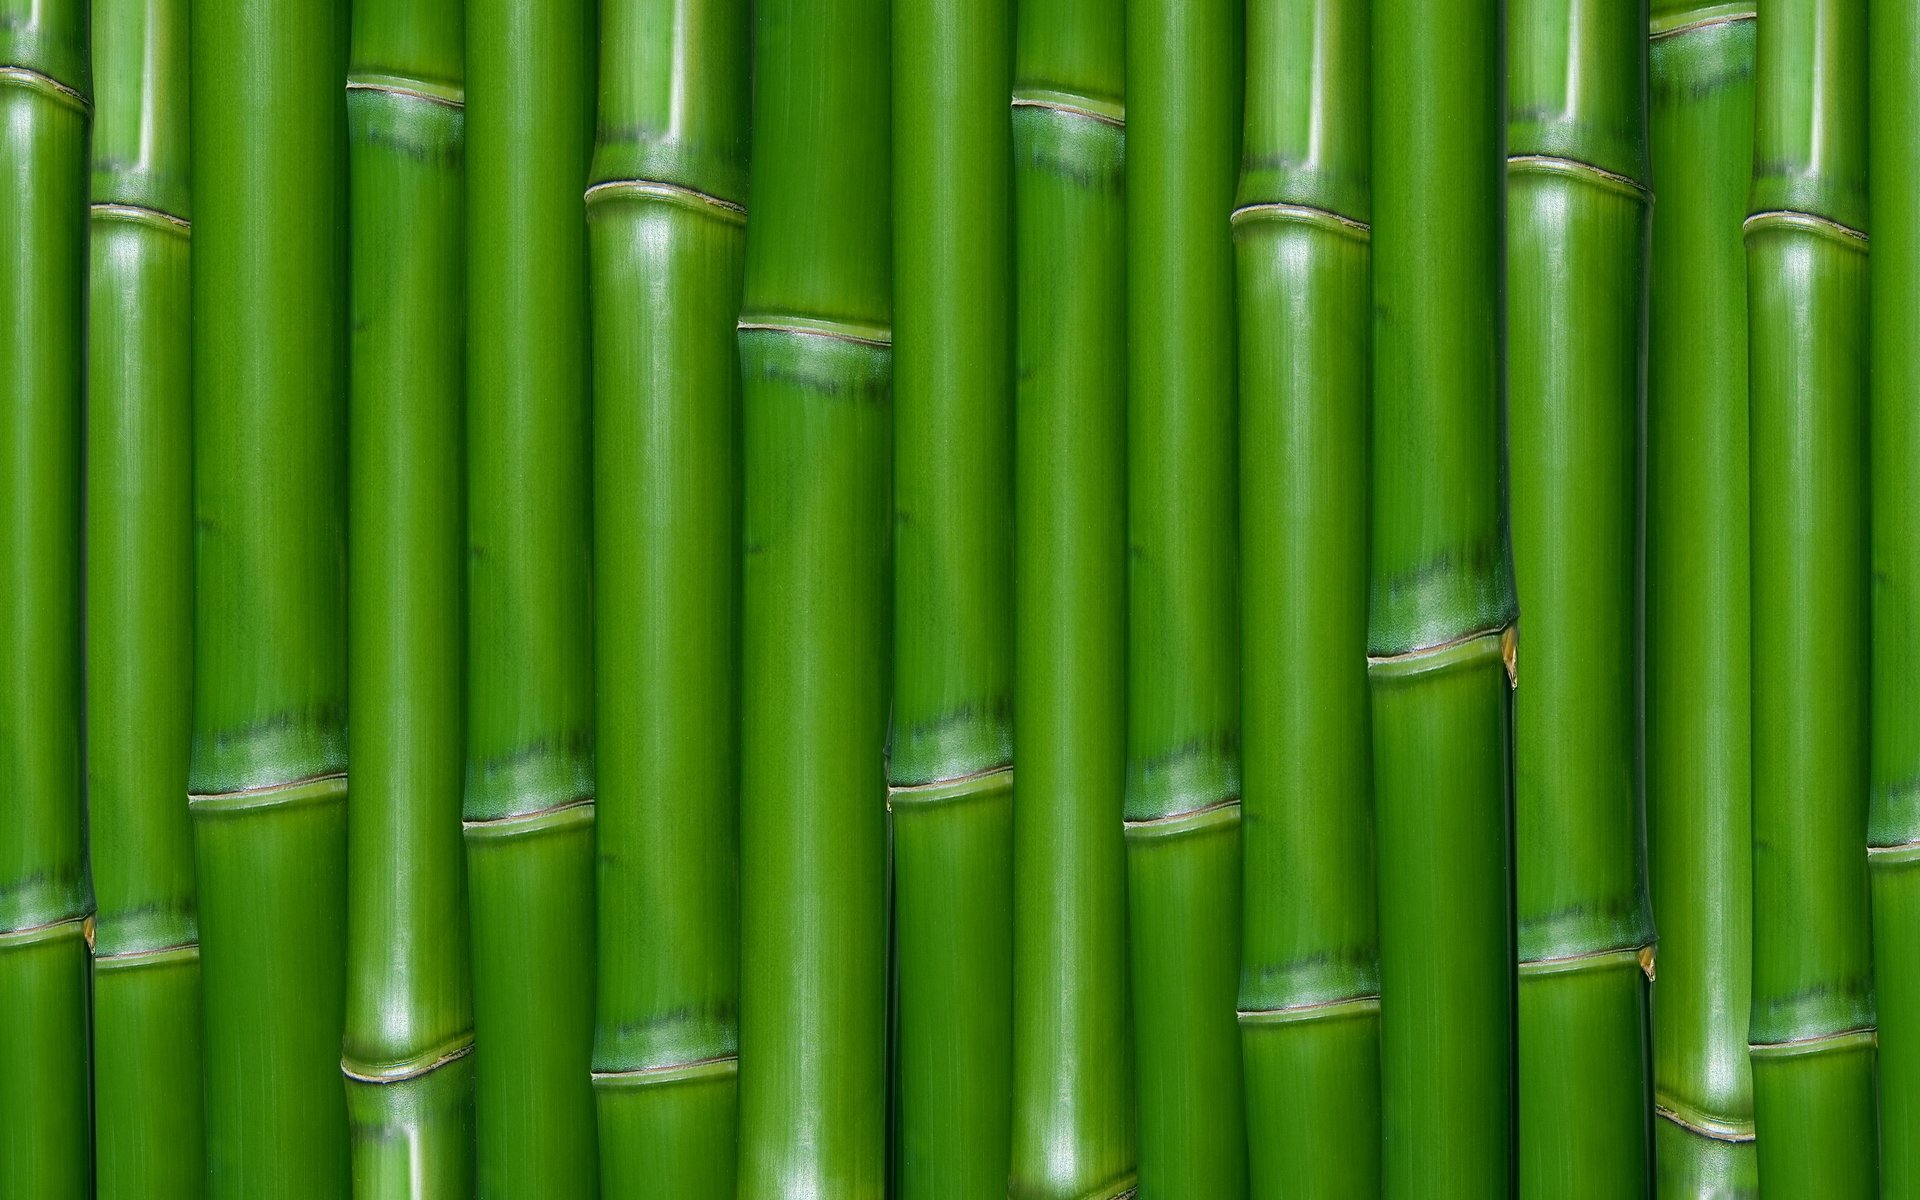 Bamboo HD Wallpaper Background Image